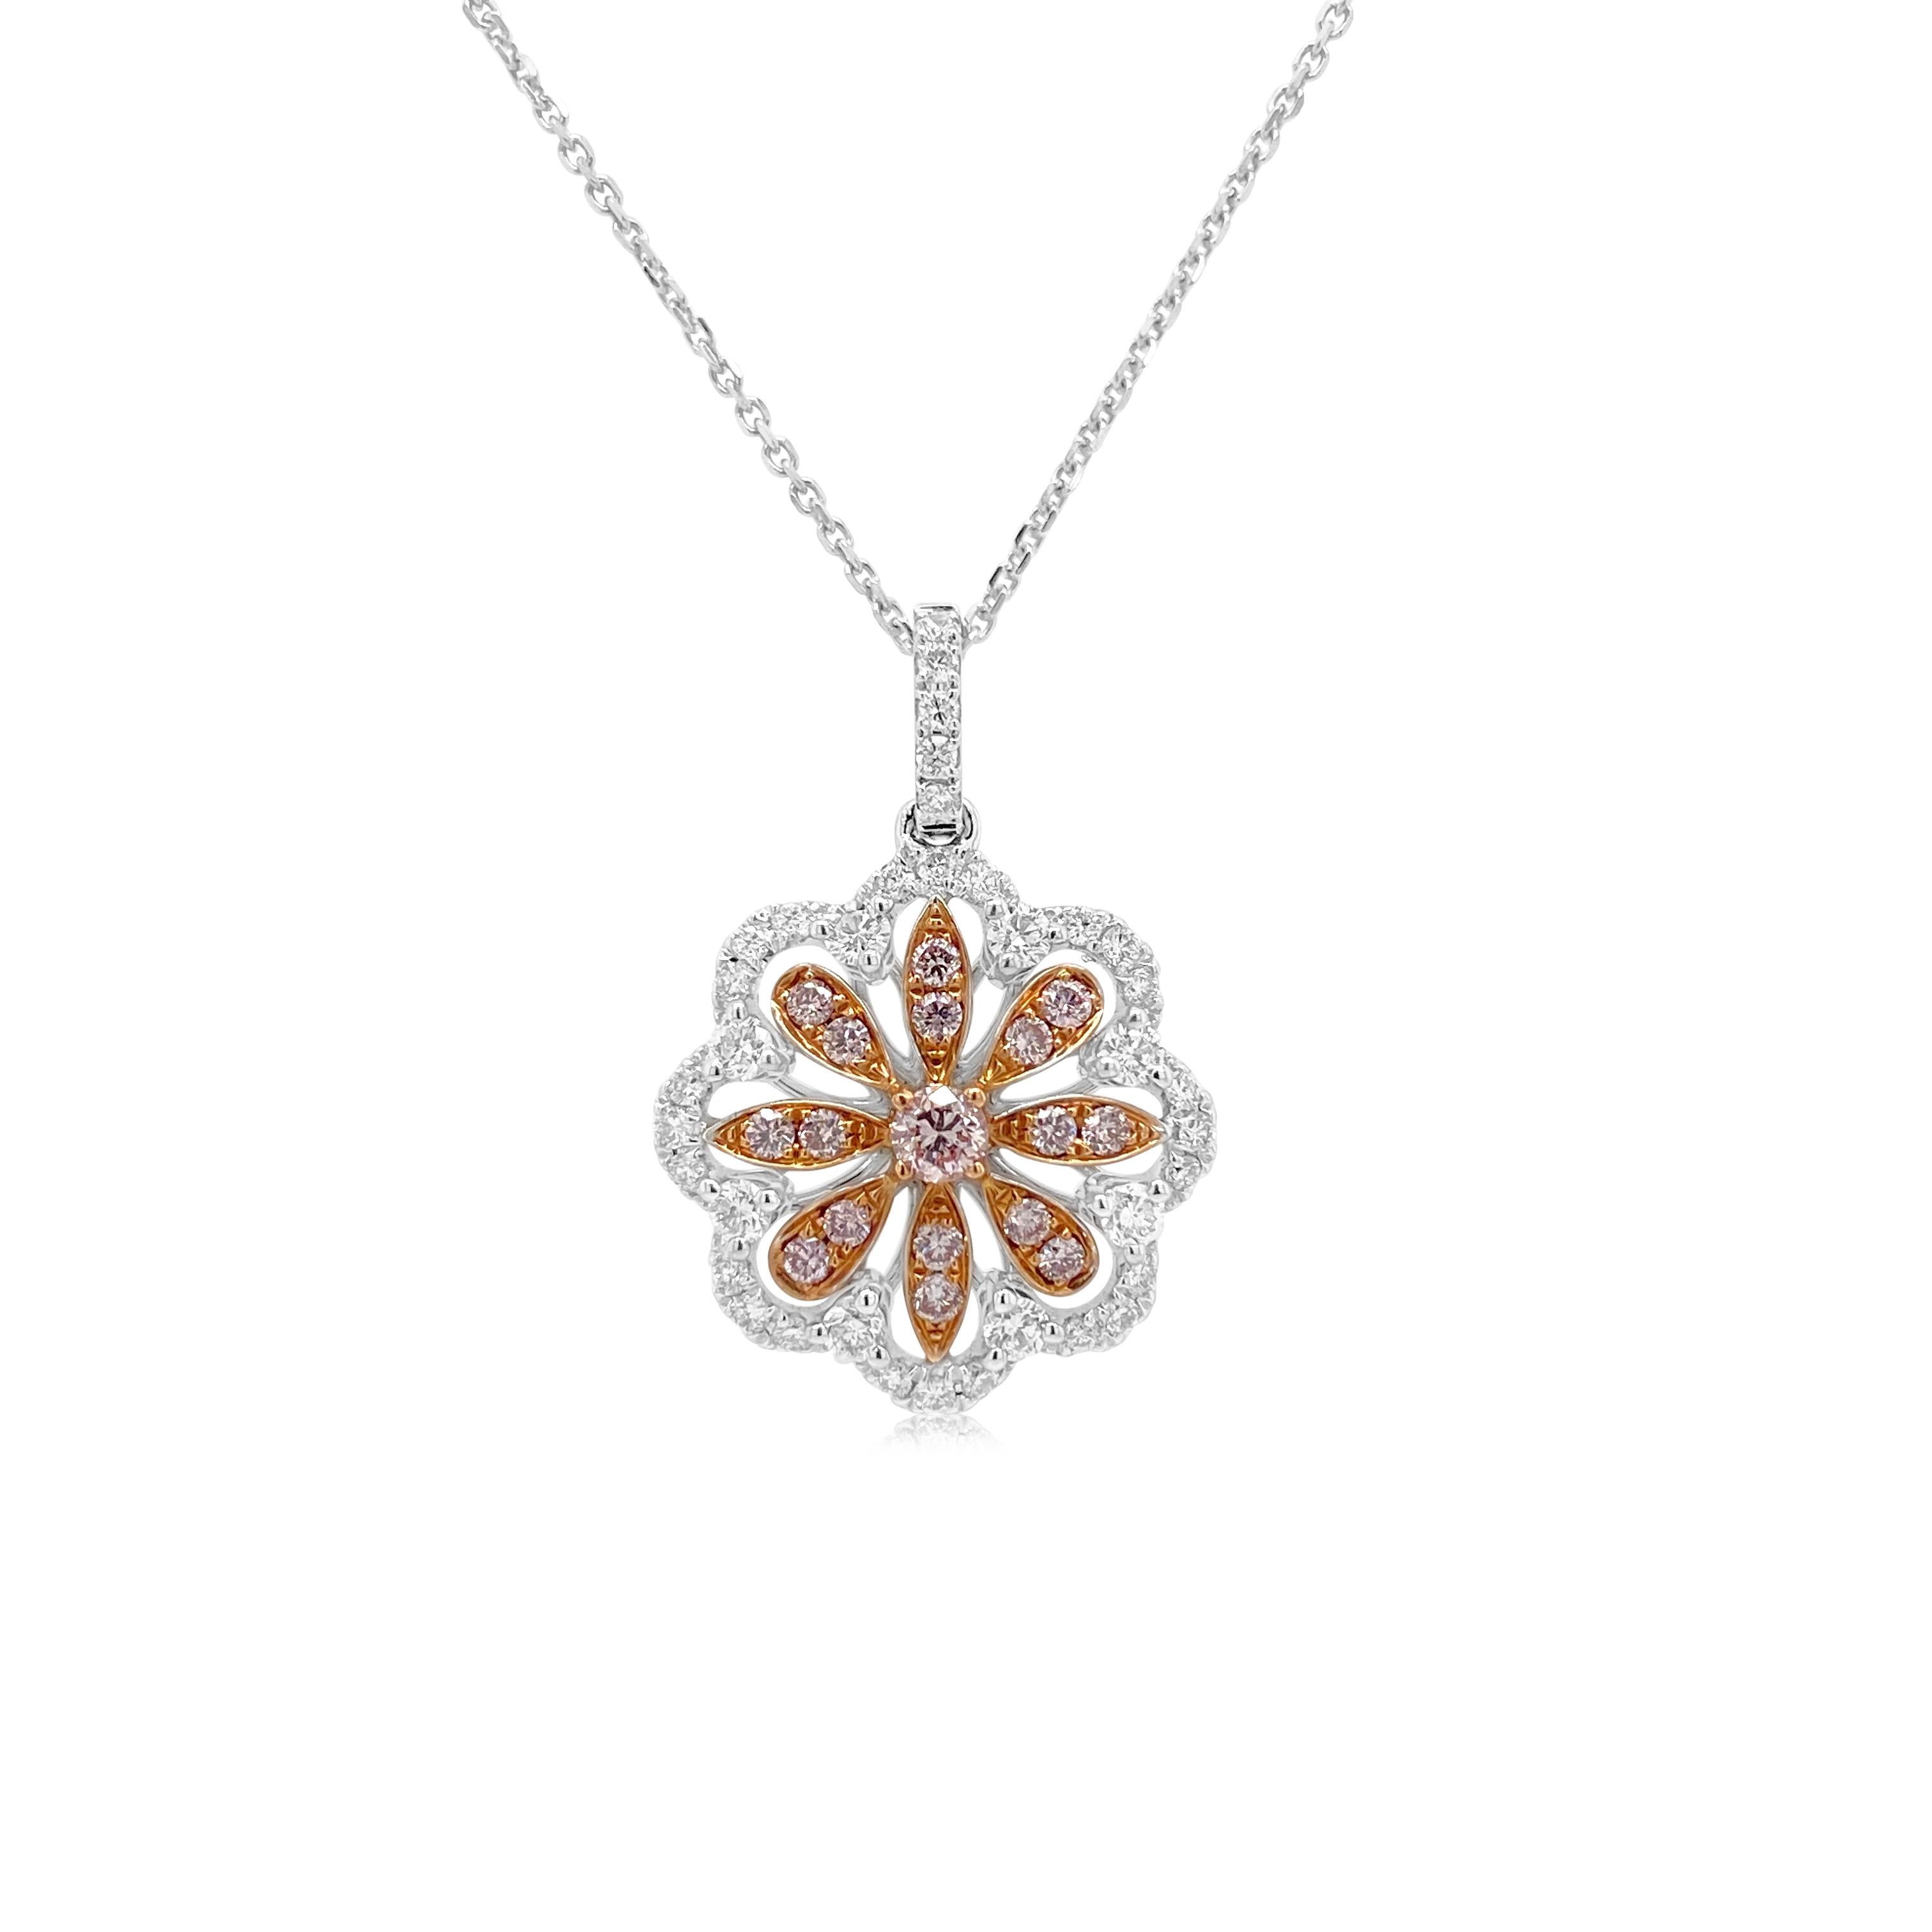 A floral diamond pendant set in style with rare Argyle Pink diamonds decorated with white diamonds , a perfect piece for fine luxury jewelry collection.

-	Round Brilliant Cut Argyle Pink Diamonds total 0.20 carat
-	Round Brilliant Cut White